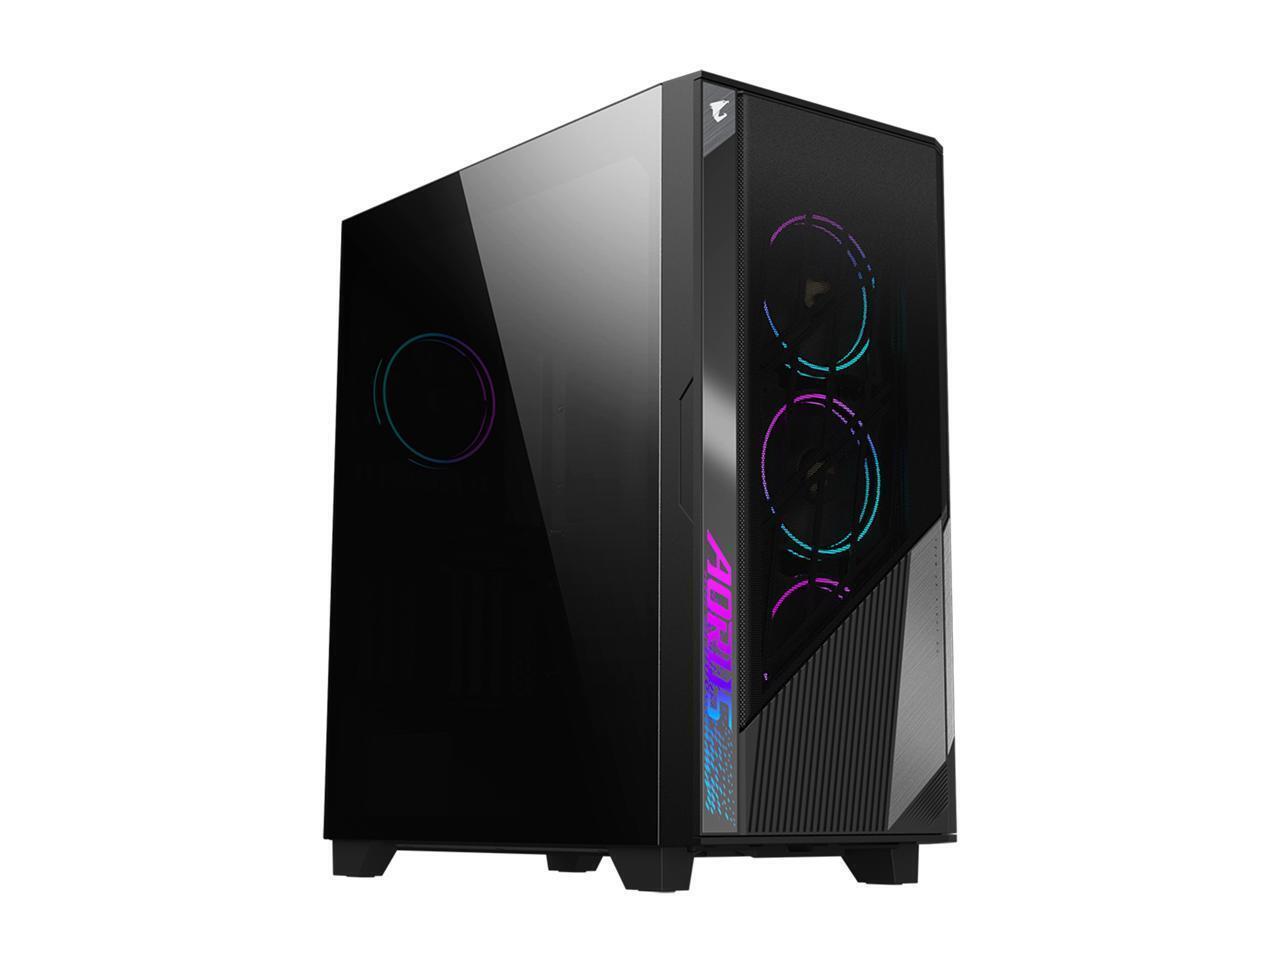 GIGABYTE AORUS C500 GLASS - Black Mid Tower PC Gaming Case, Tempered Glass, USB